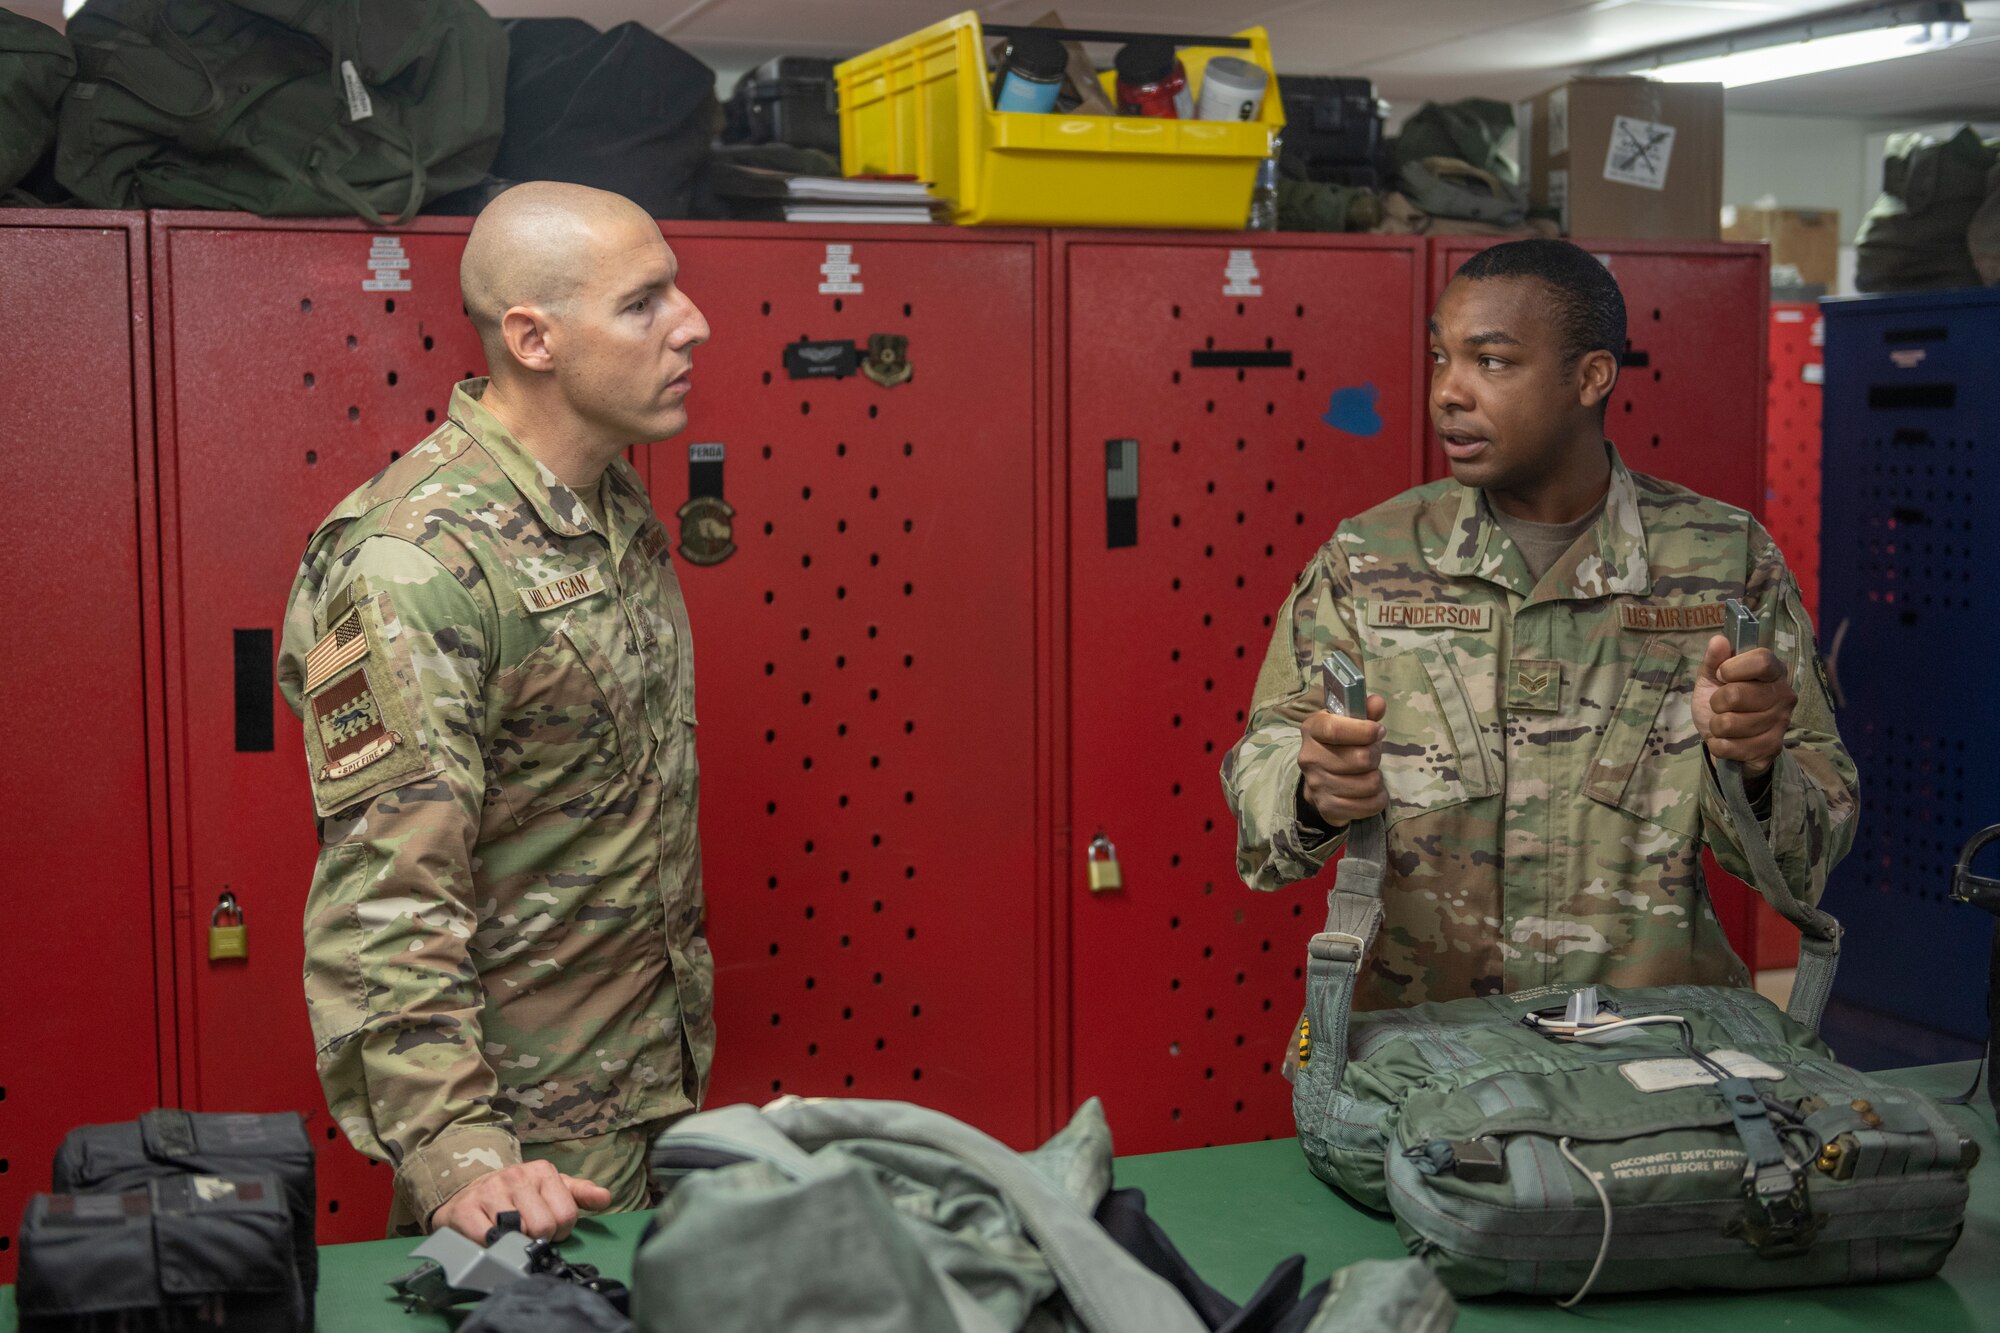 U.S. Air Force Senior Airman Caleb Henderson, right, 494th Expeditionary Fighter Squadron aircrew flight equipment technician, explains to Chief Master Sgt. Sean Milligan, 332nd Air Expeditionary Wing command chief, how to equip an Advanced Concept Ejection Seat II Survival Kit Sept. 4, 2021, at an undisclosed location somewhere in Southwest Asia. Aircrew flight equipment technicians ensure pilots are equipped with the specific gear needed to perform their missions. (U.S. Air Force photo by Senior Airman Cameron Otte)